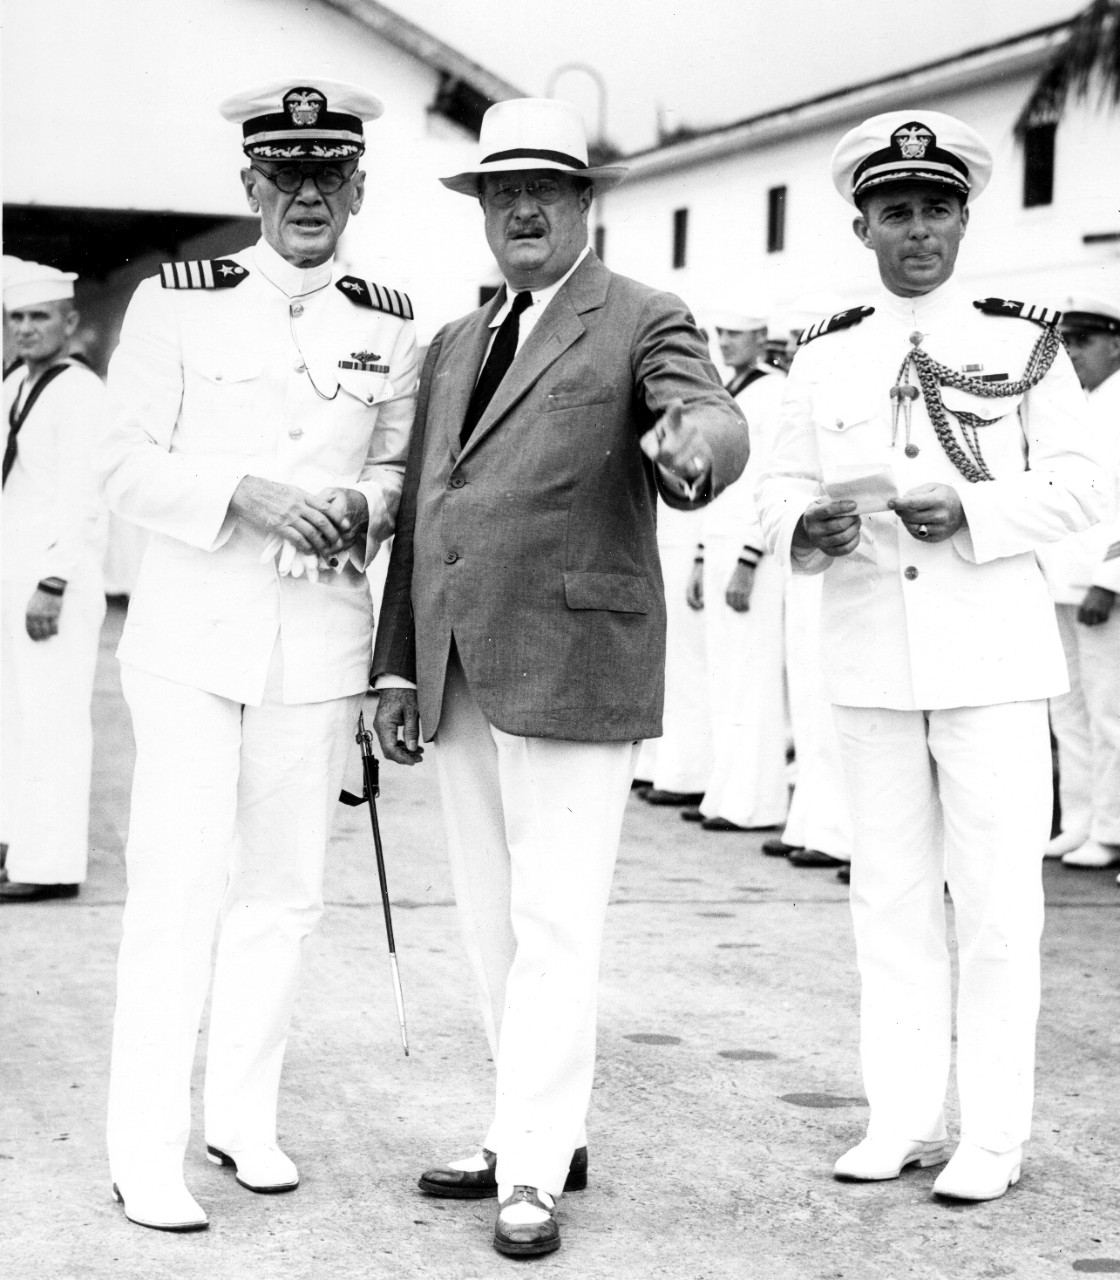 Cmdr. Merrill (R), his aiguillettes indicating his aide status, accompanies Assistant Secretary of the Navy Roosevelt (C) as he inspects the Fleet Air Base, Coco Solo, Canal Zone, on 4 August 1933. Capt. Paul P. Blackburn stands at left. (U.S. Na...